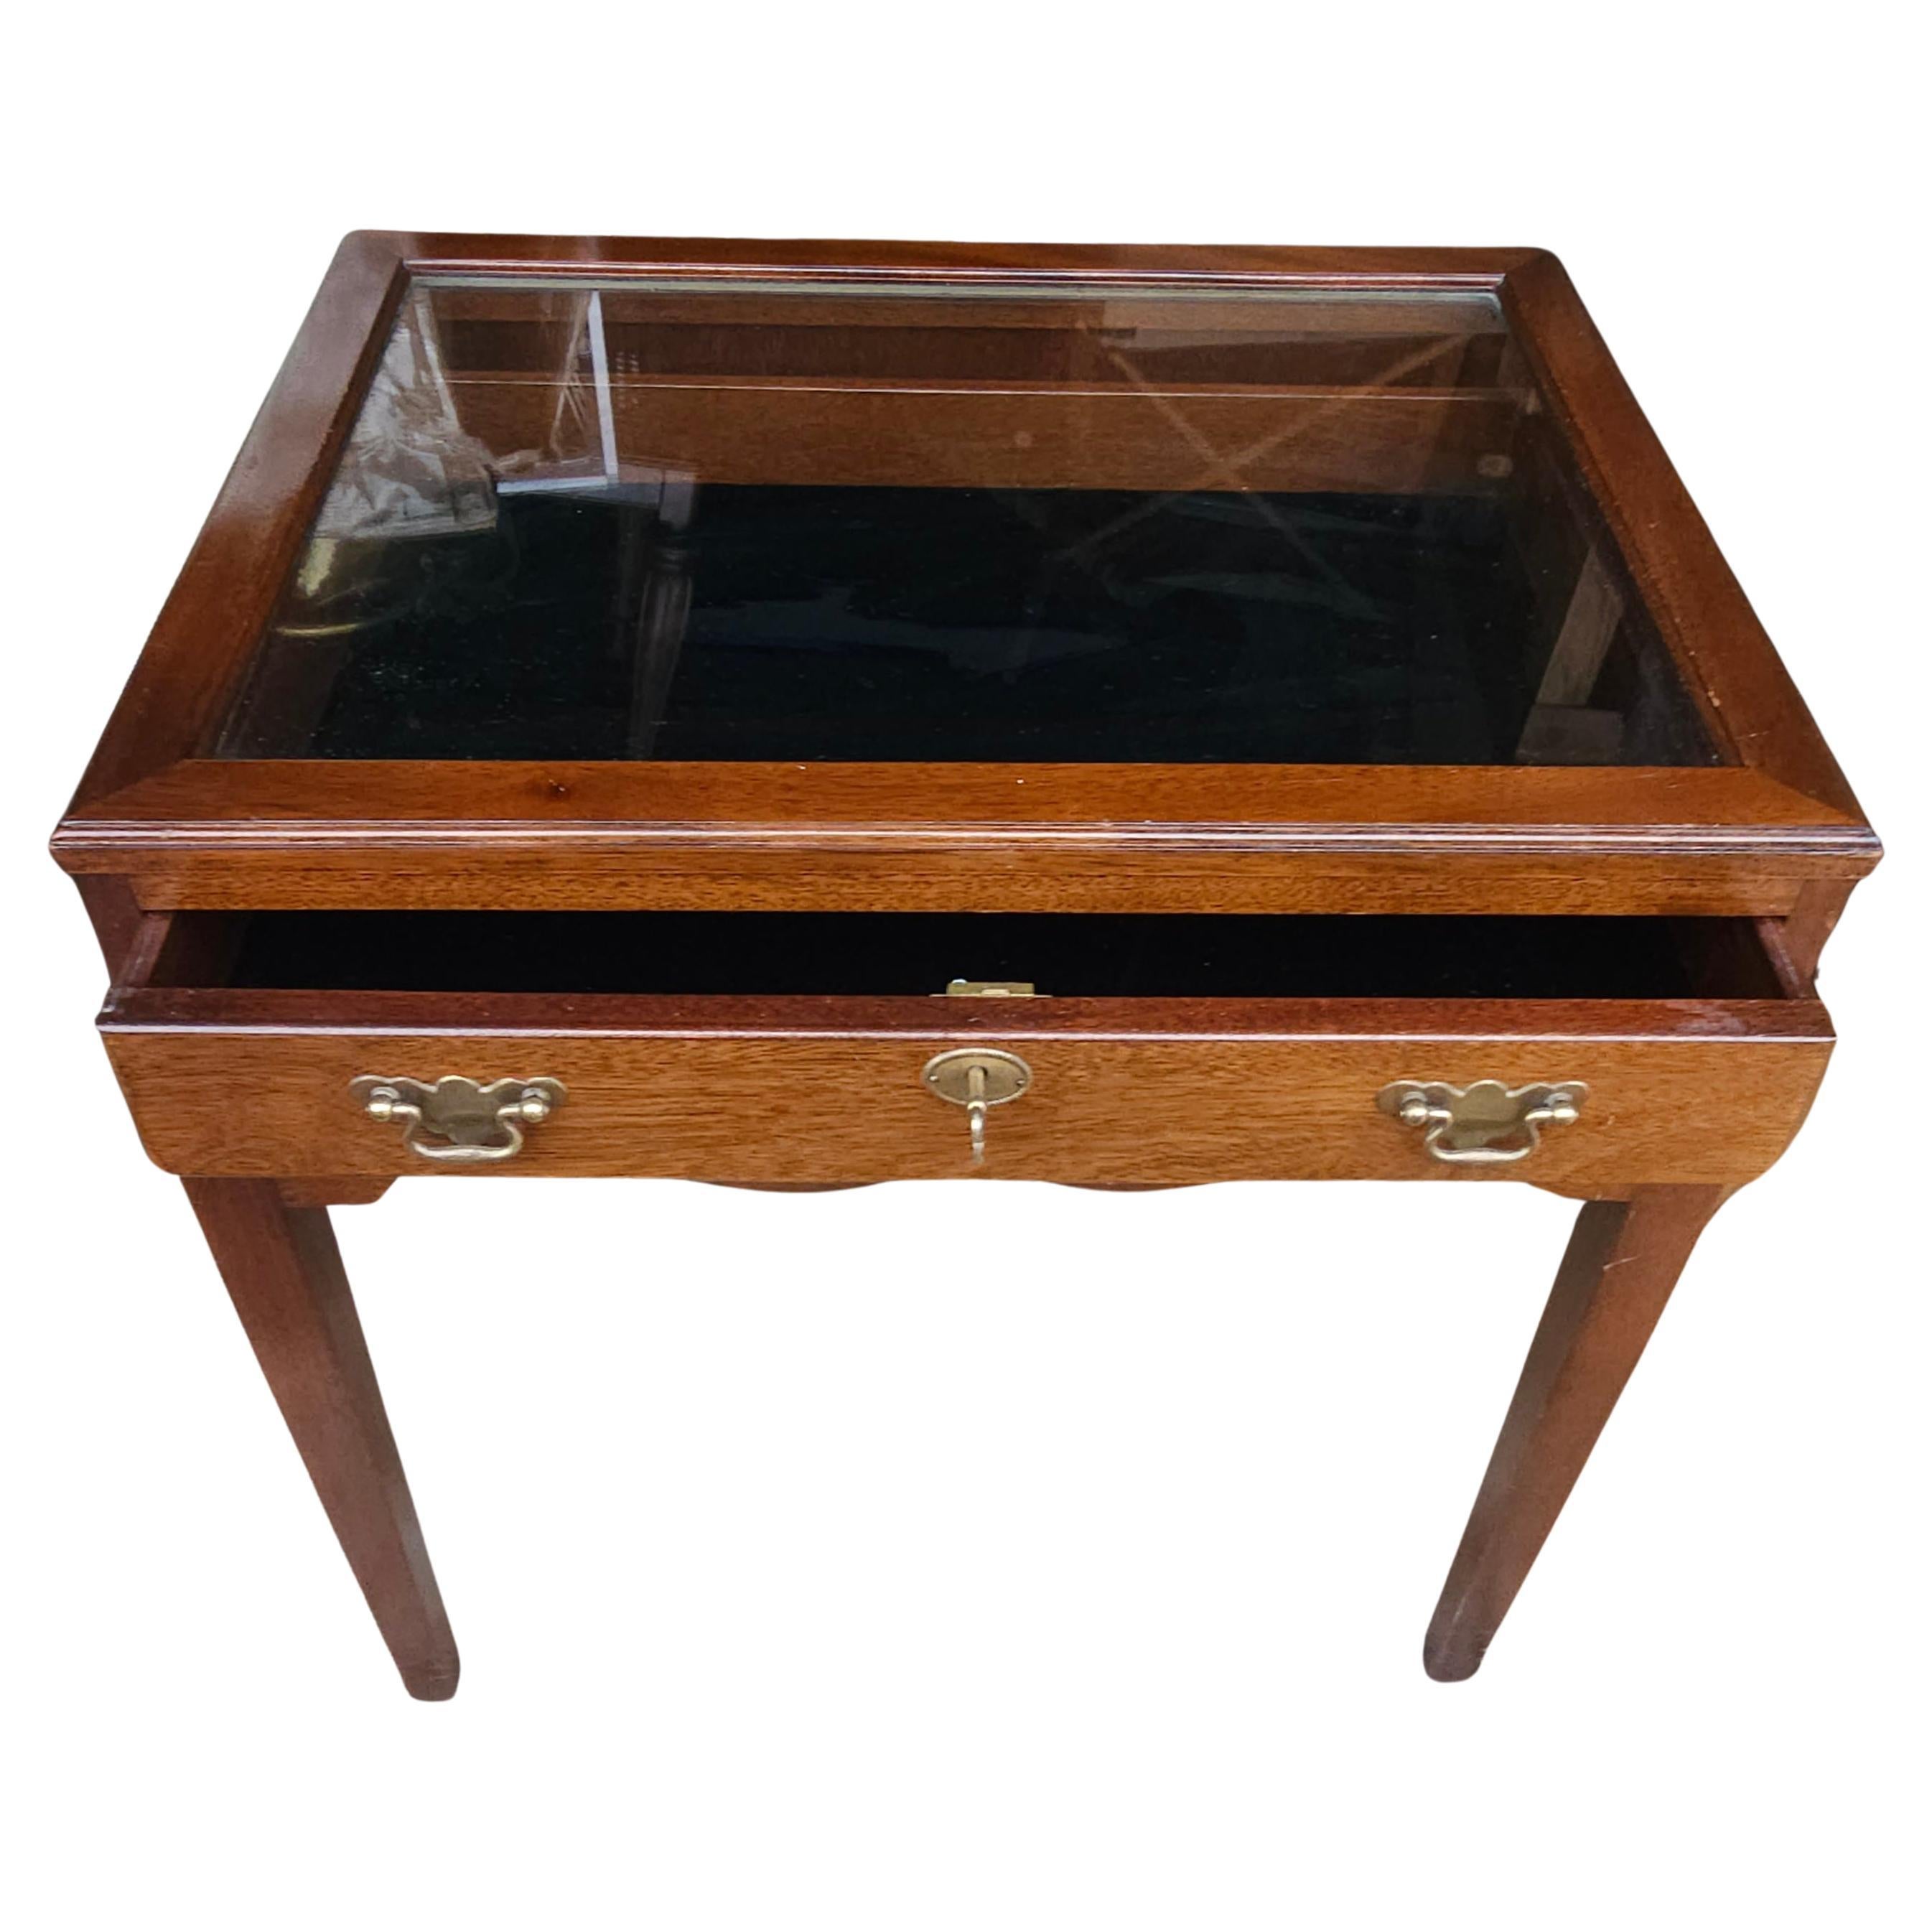 Other 20th Century Mahogany and Velvet Lined with Glass Top Lockable Display Table